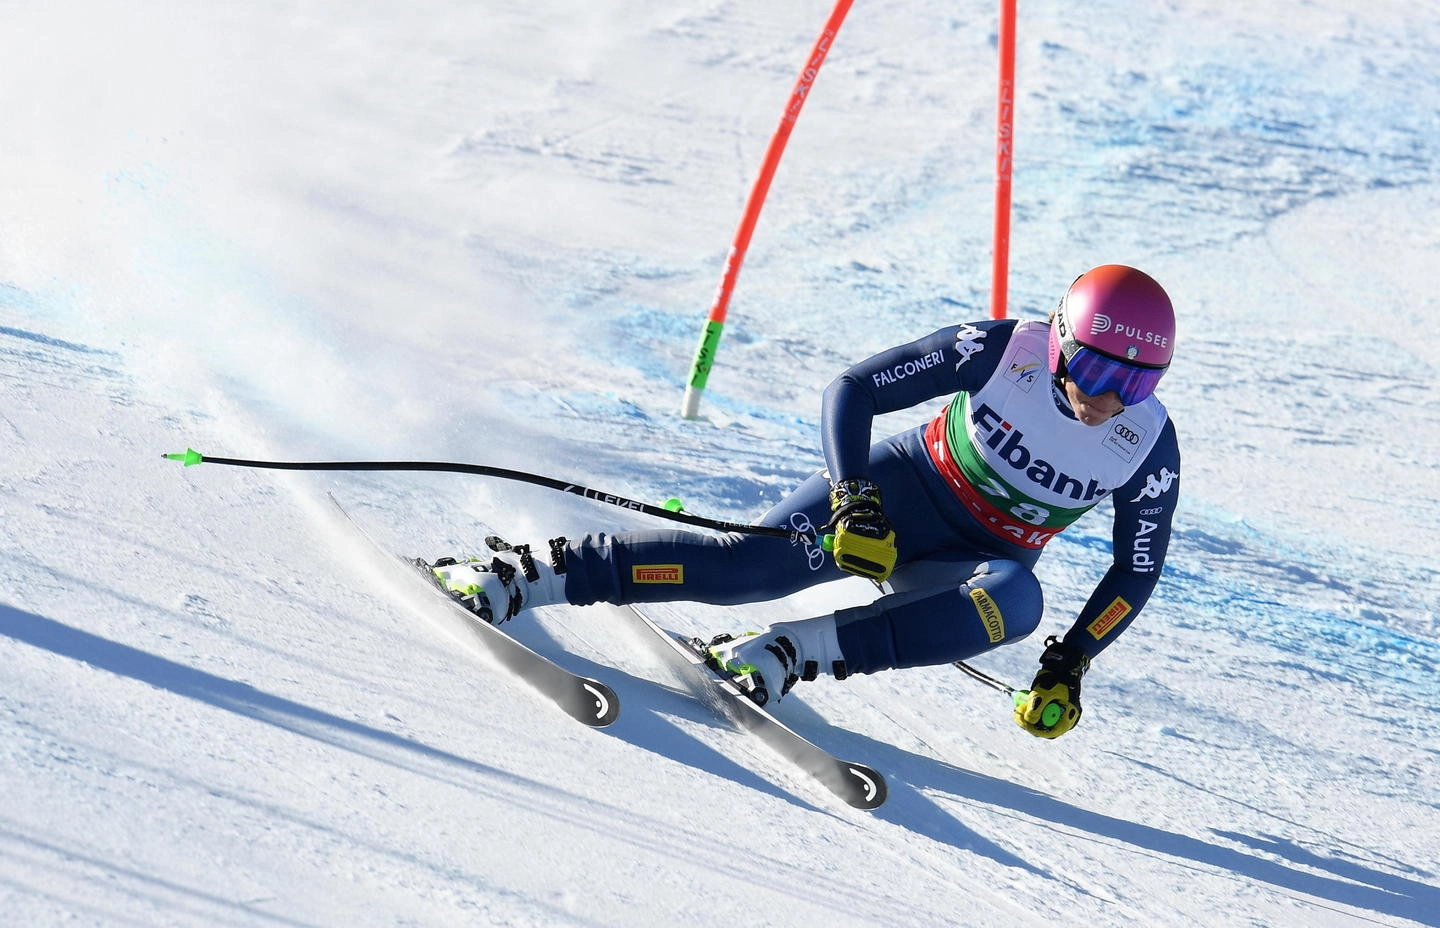 epa08162395 Elena Curtoni of Italy in action during  the women's Downhill race of the Alpine Skiing World Cup in Bansko, Bulgaria, 25 January 2020  EPA/VASSIL DONEV